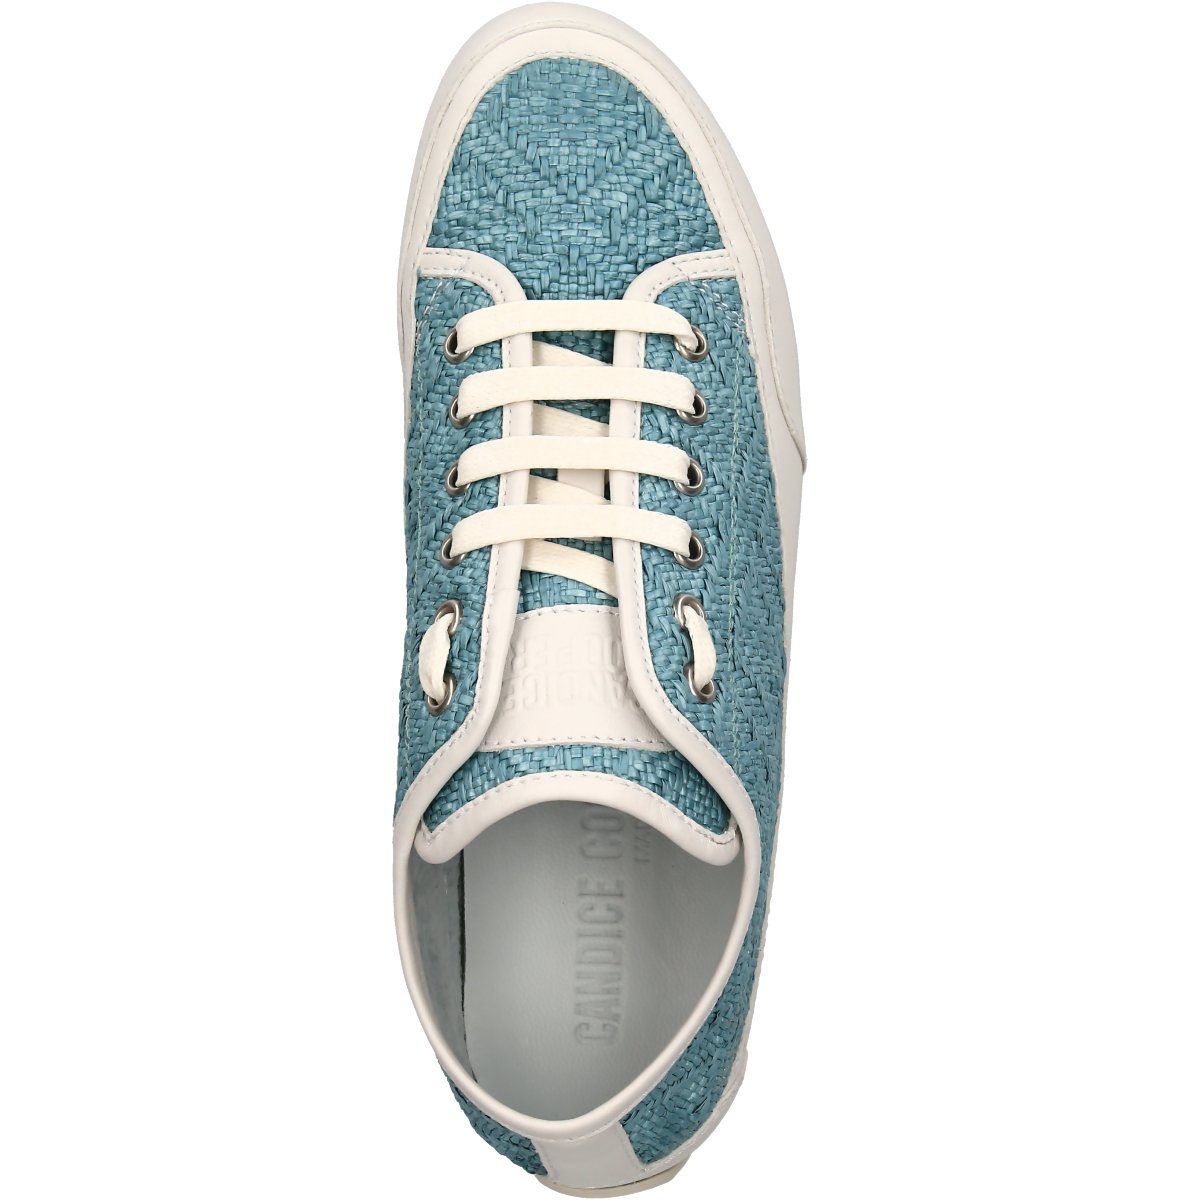 Candice Cooper ROCK PIPING Sneaker